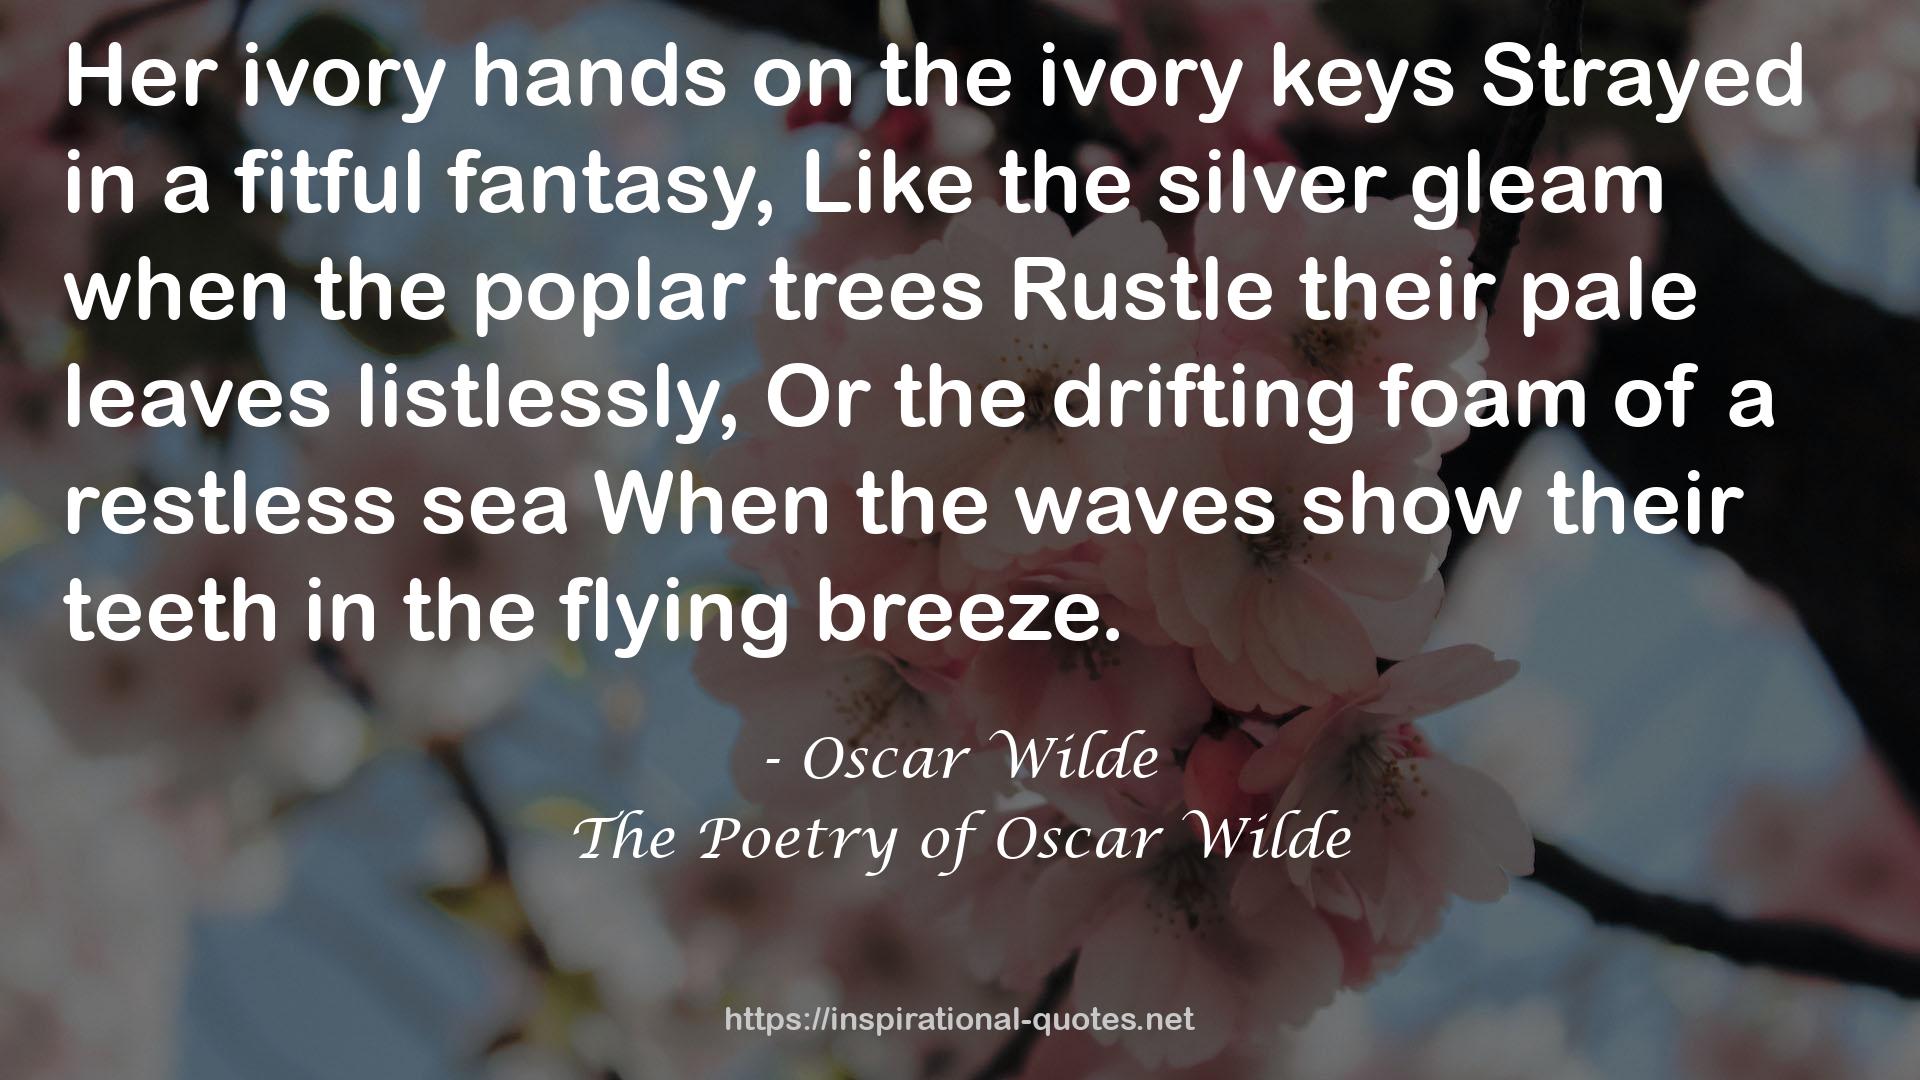 The Poetry of Oscar Wilde QUOTES